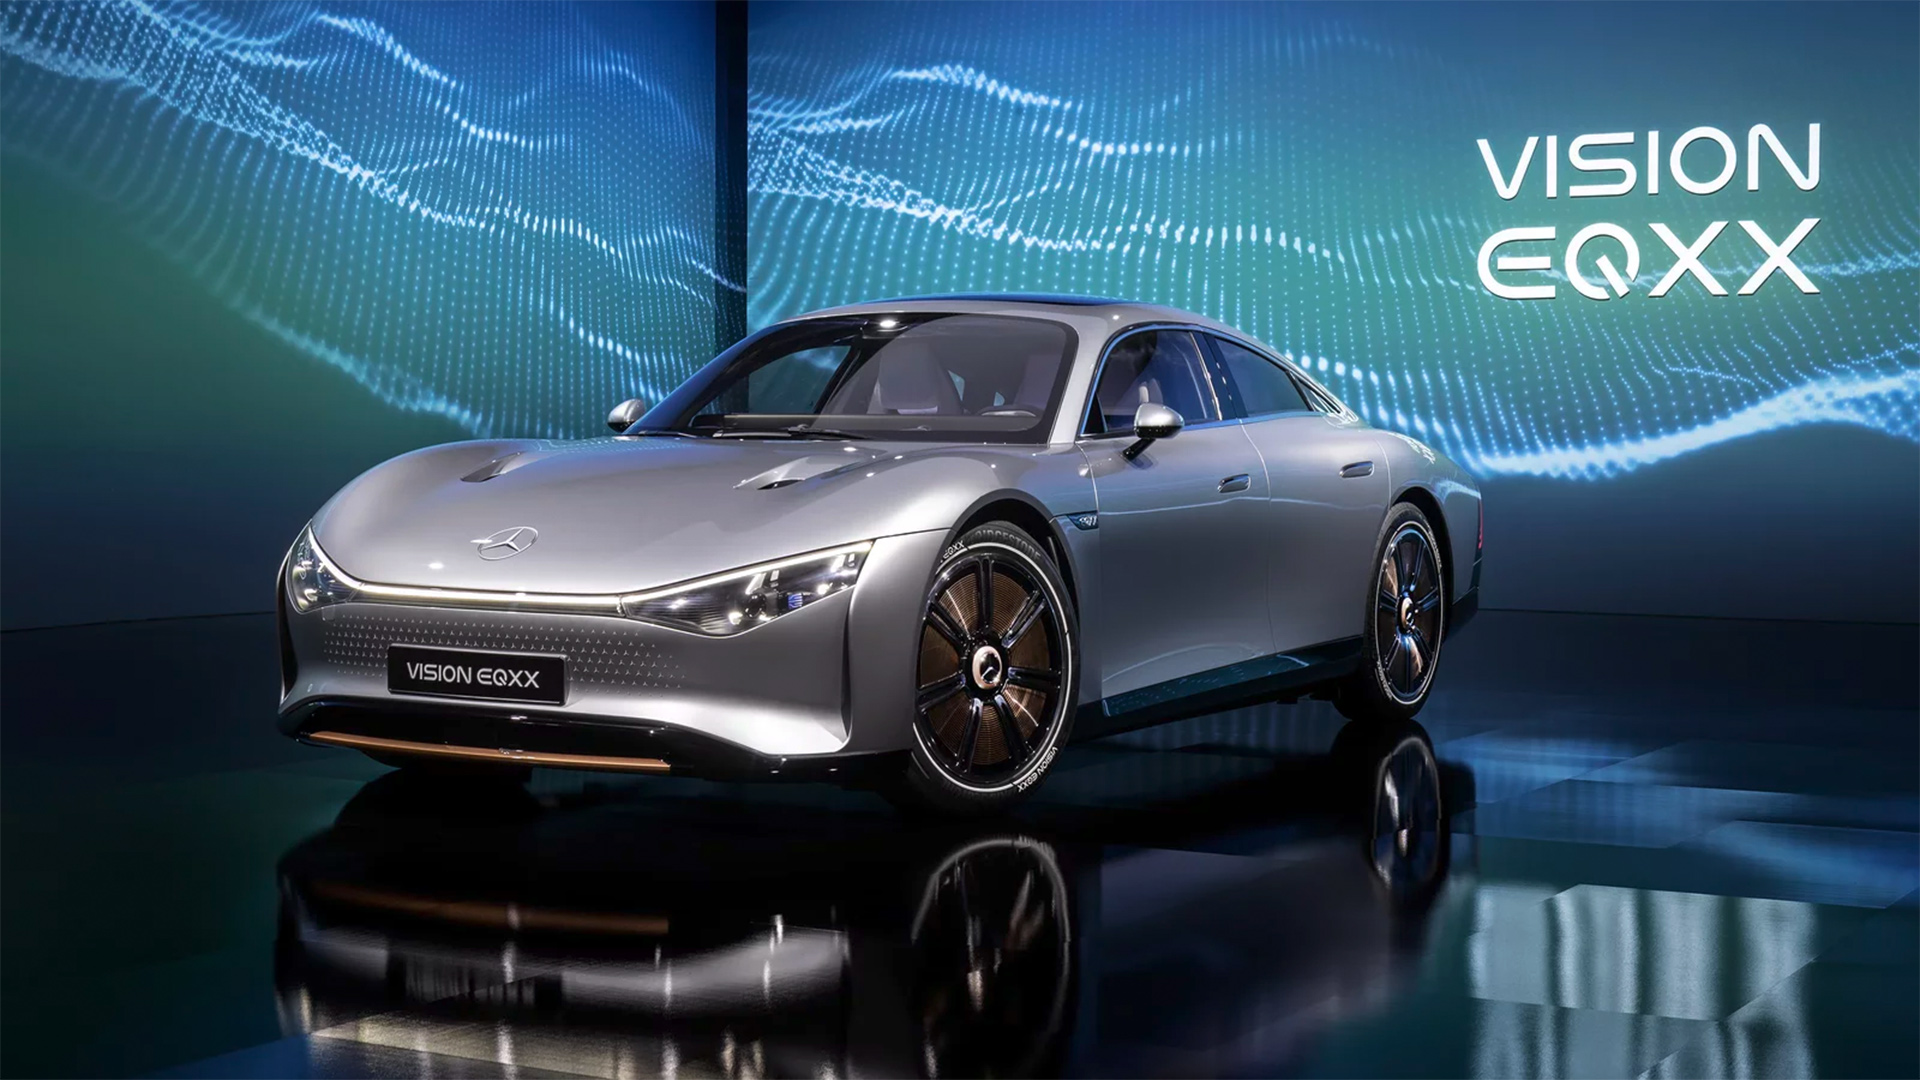 Mercedes-Benz unveiled their electric vehicle concept car, the VISION EQXX.